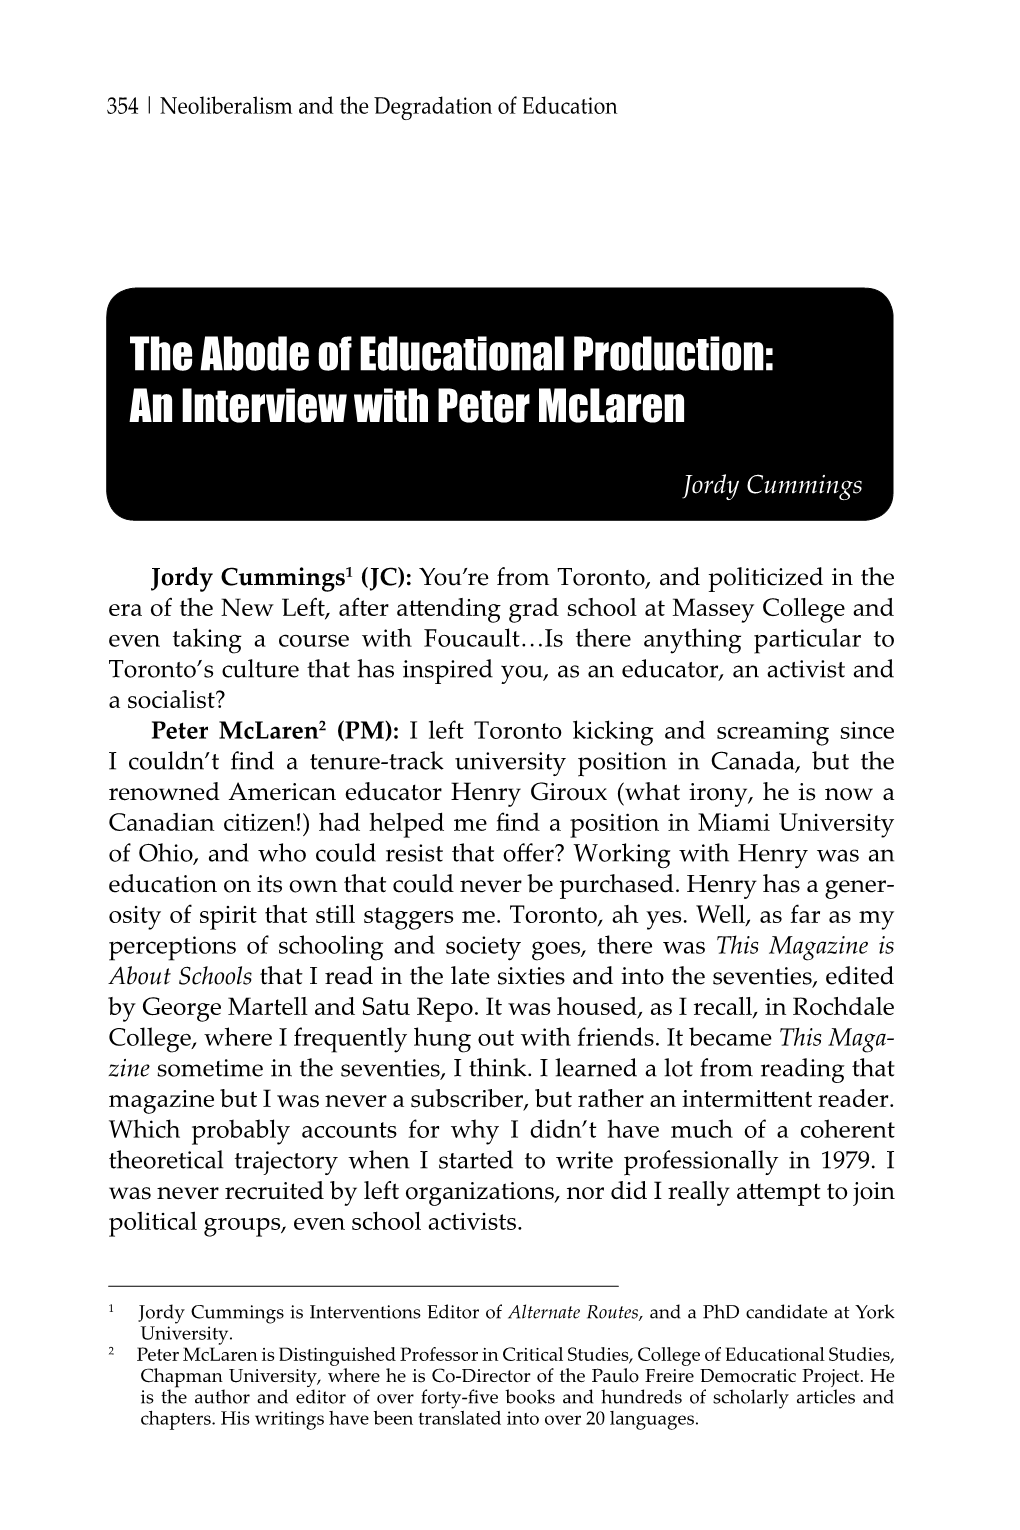 The Abode of Educational Production: an Interview with Peter Mclaren